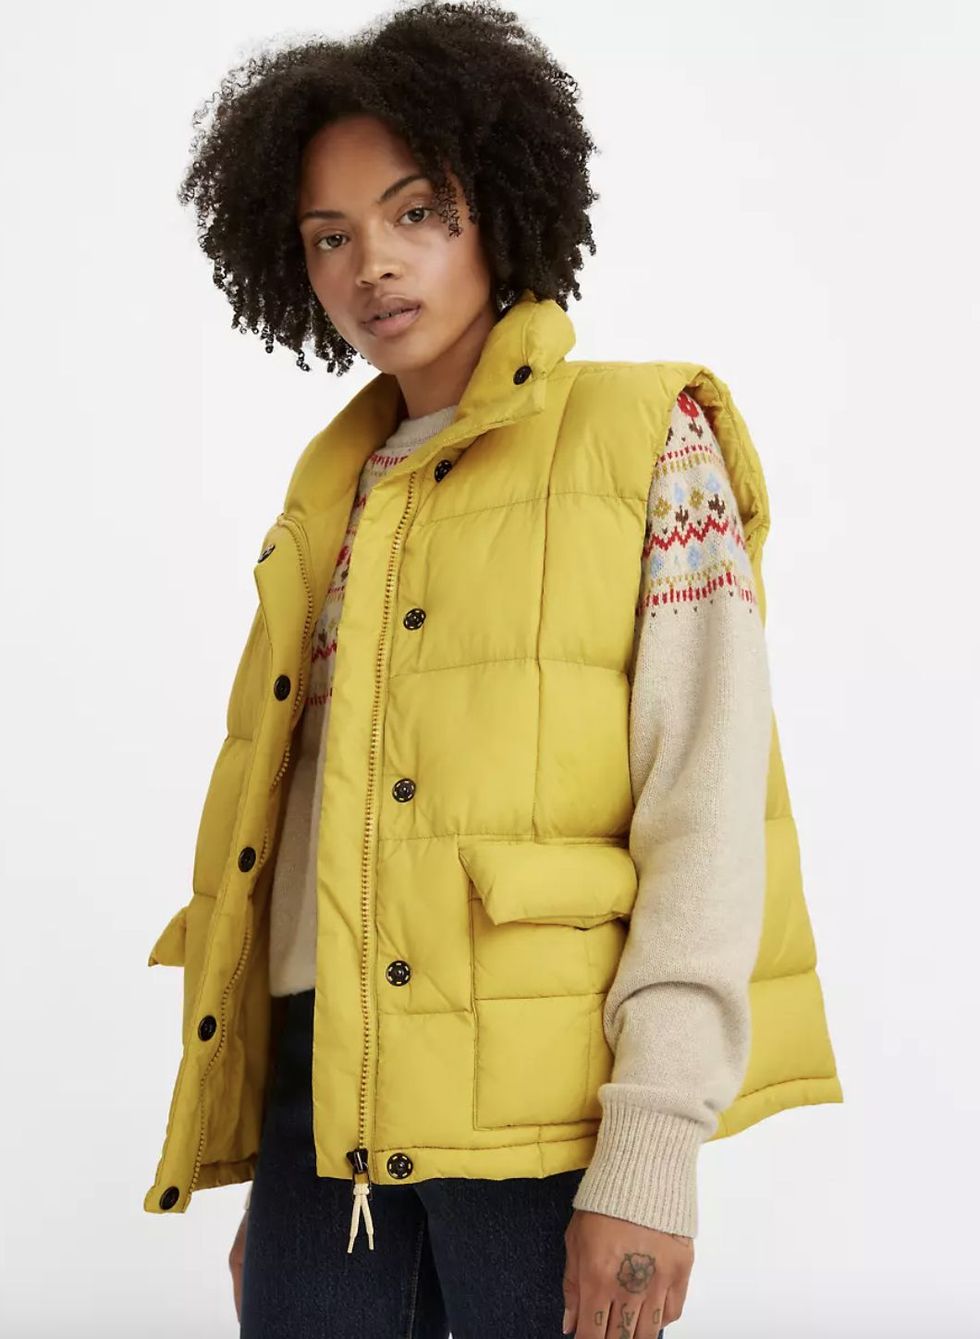 The Best Puffer Vests Outfits to Copy This Season